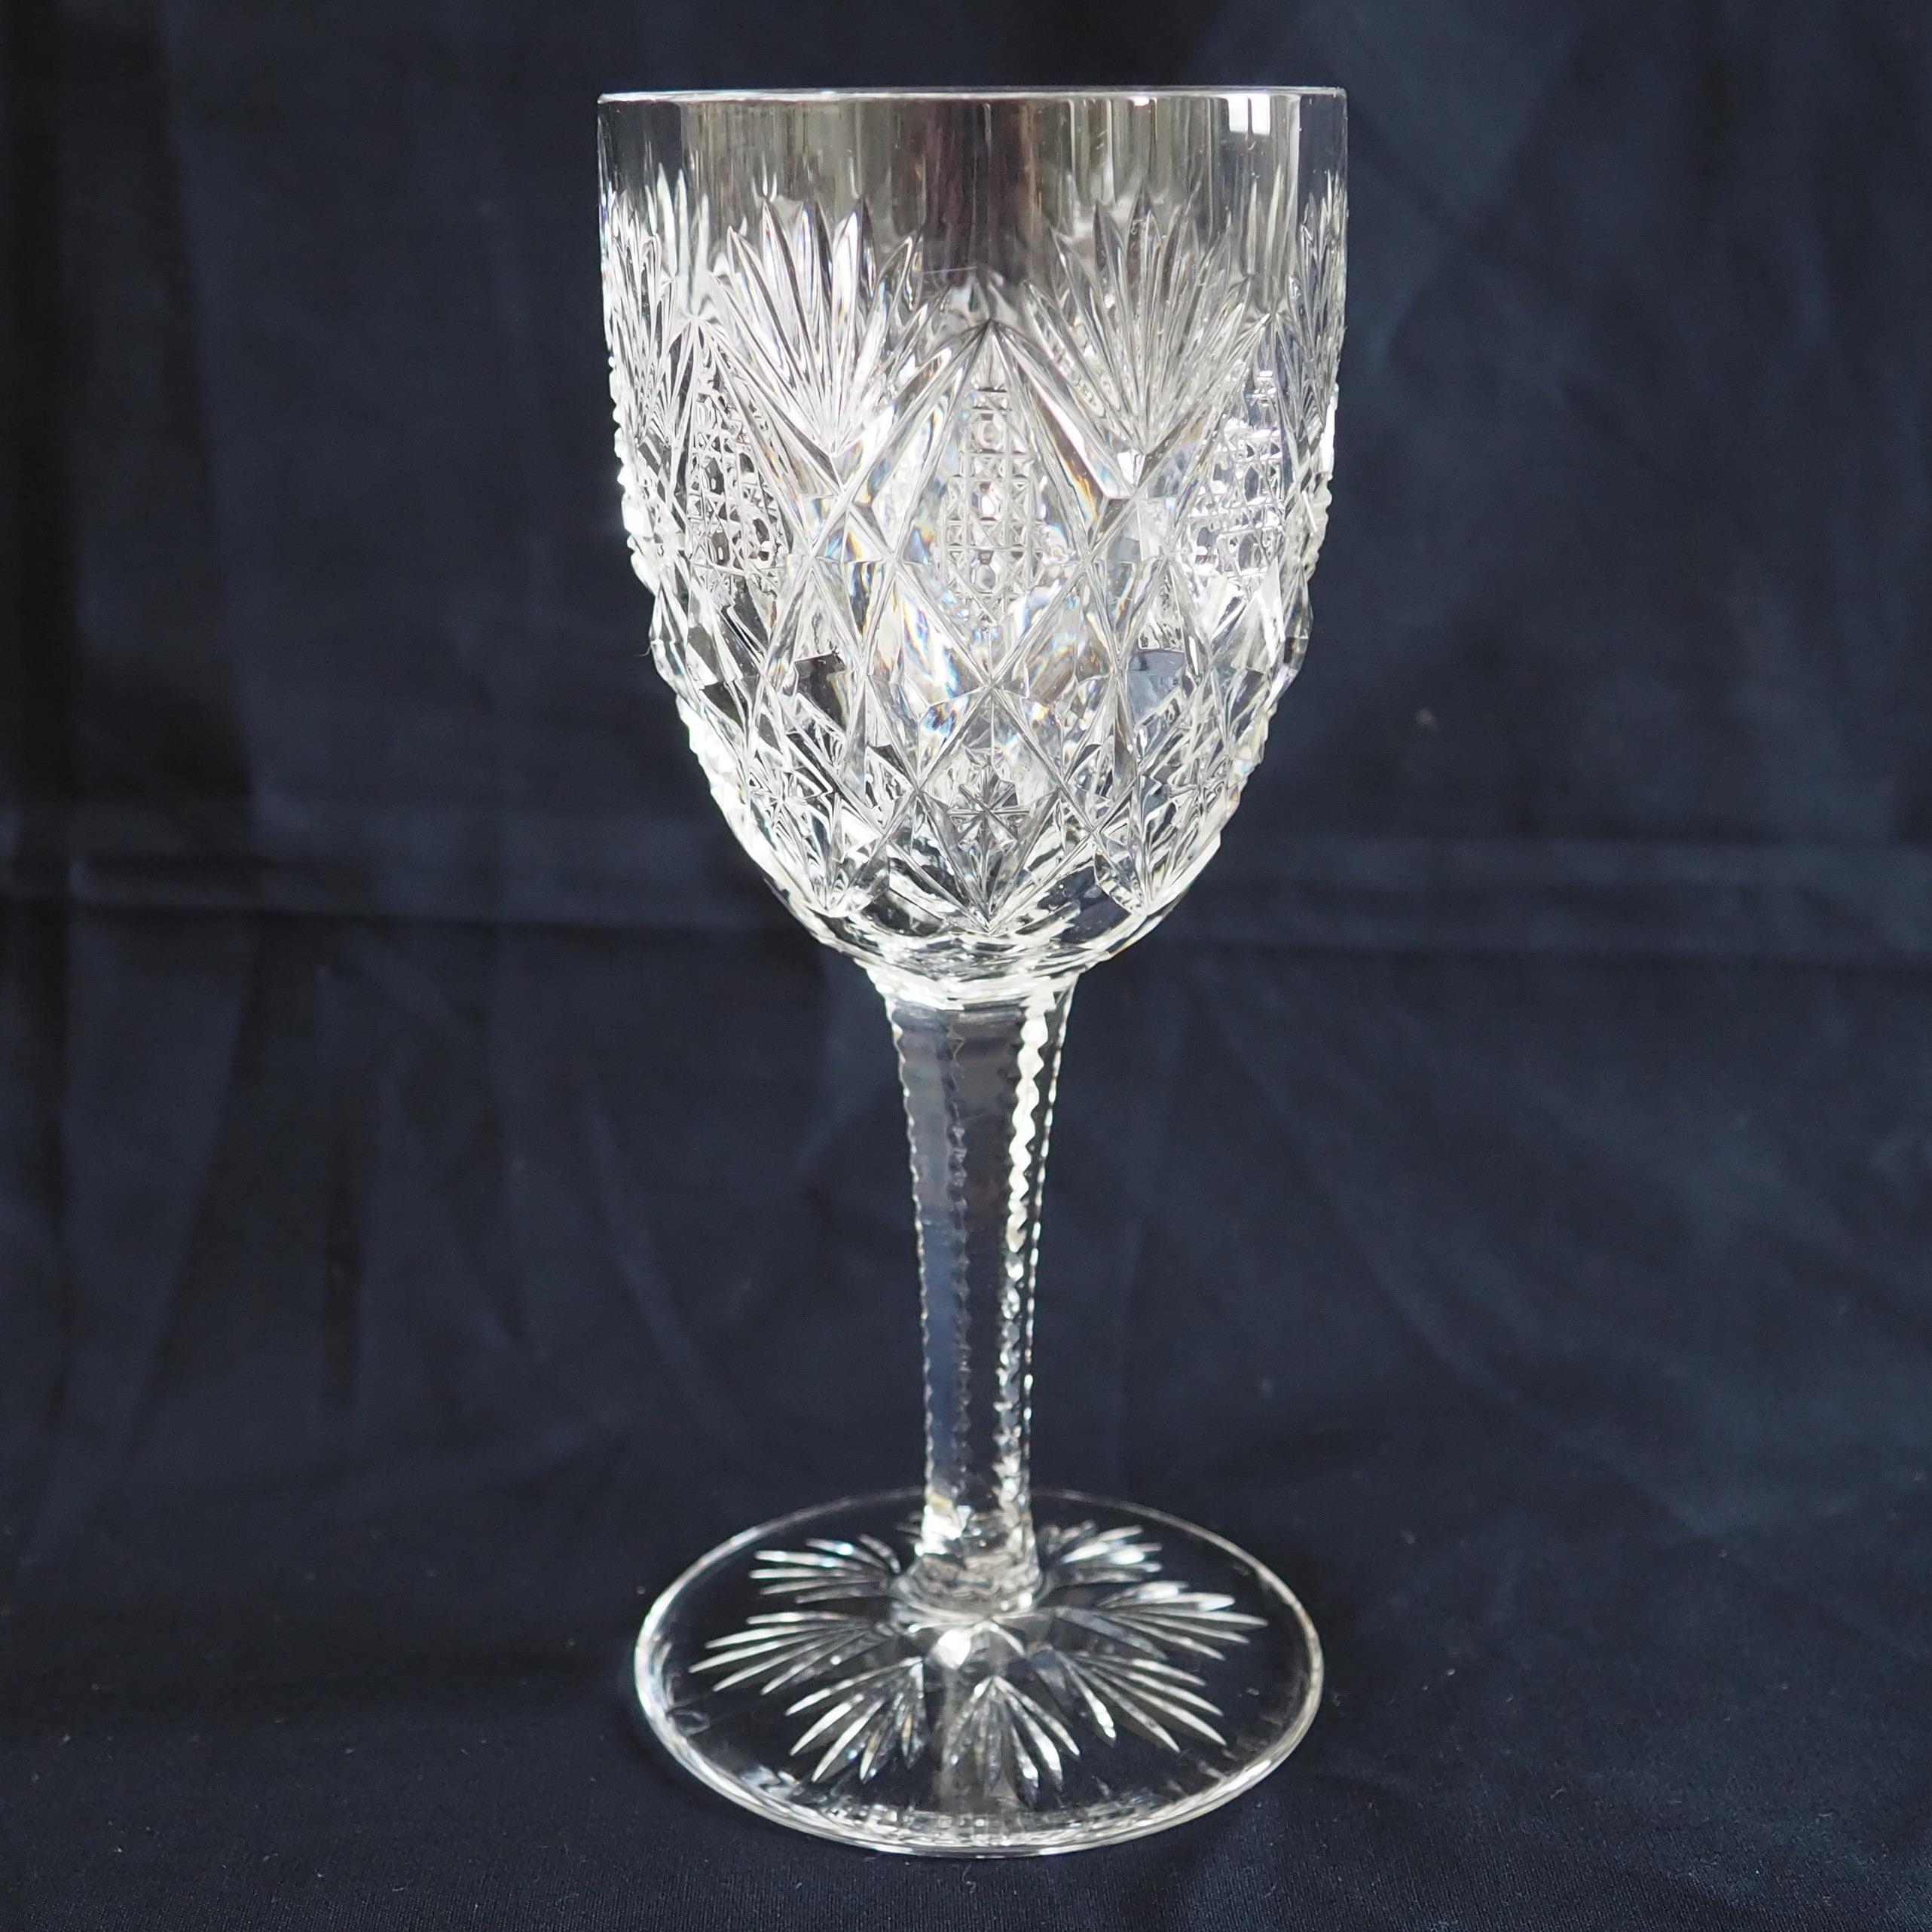 French Set of 24 St Louis crystal glasses (6*4), Florence pattern - signed - 6 guests